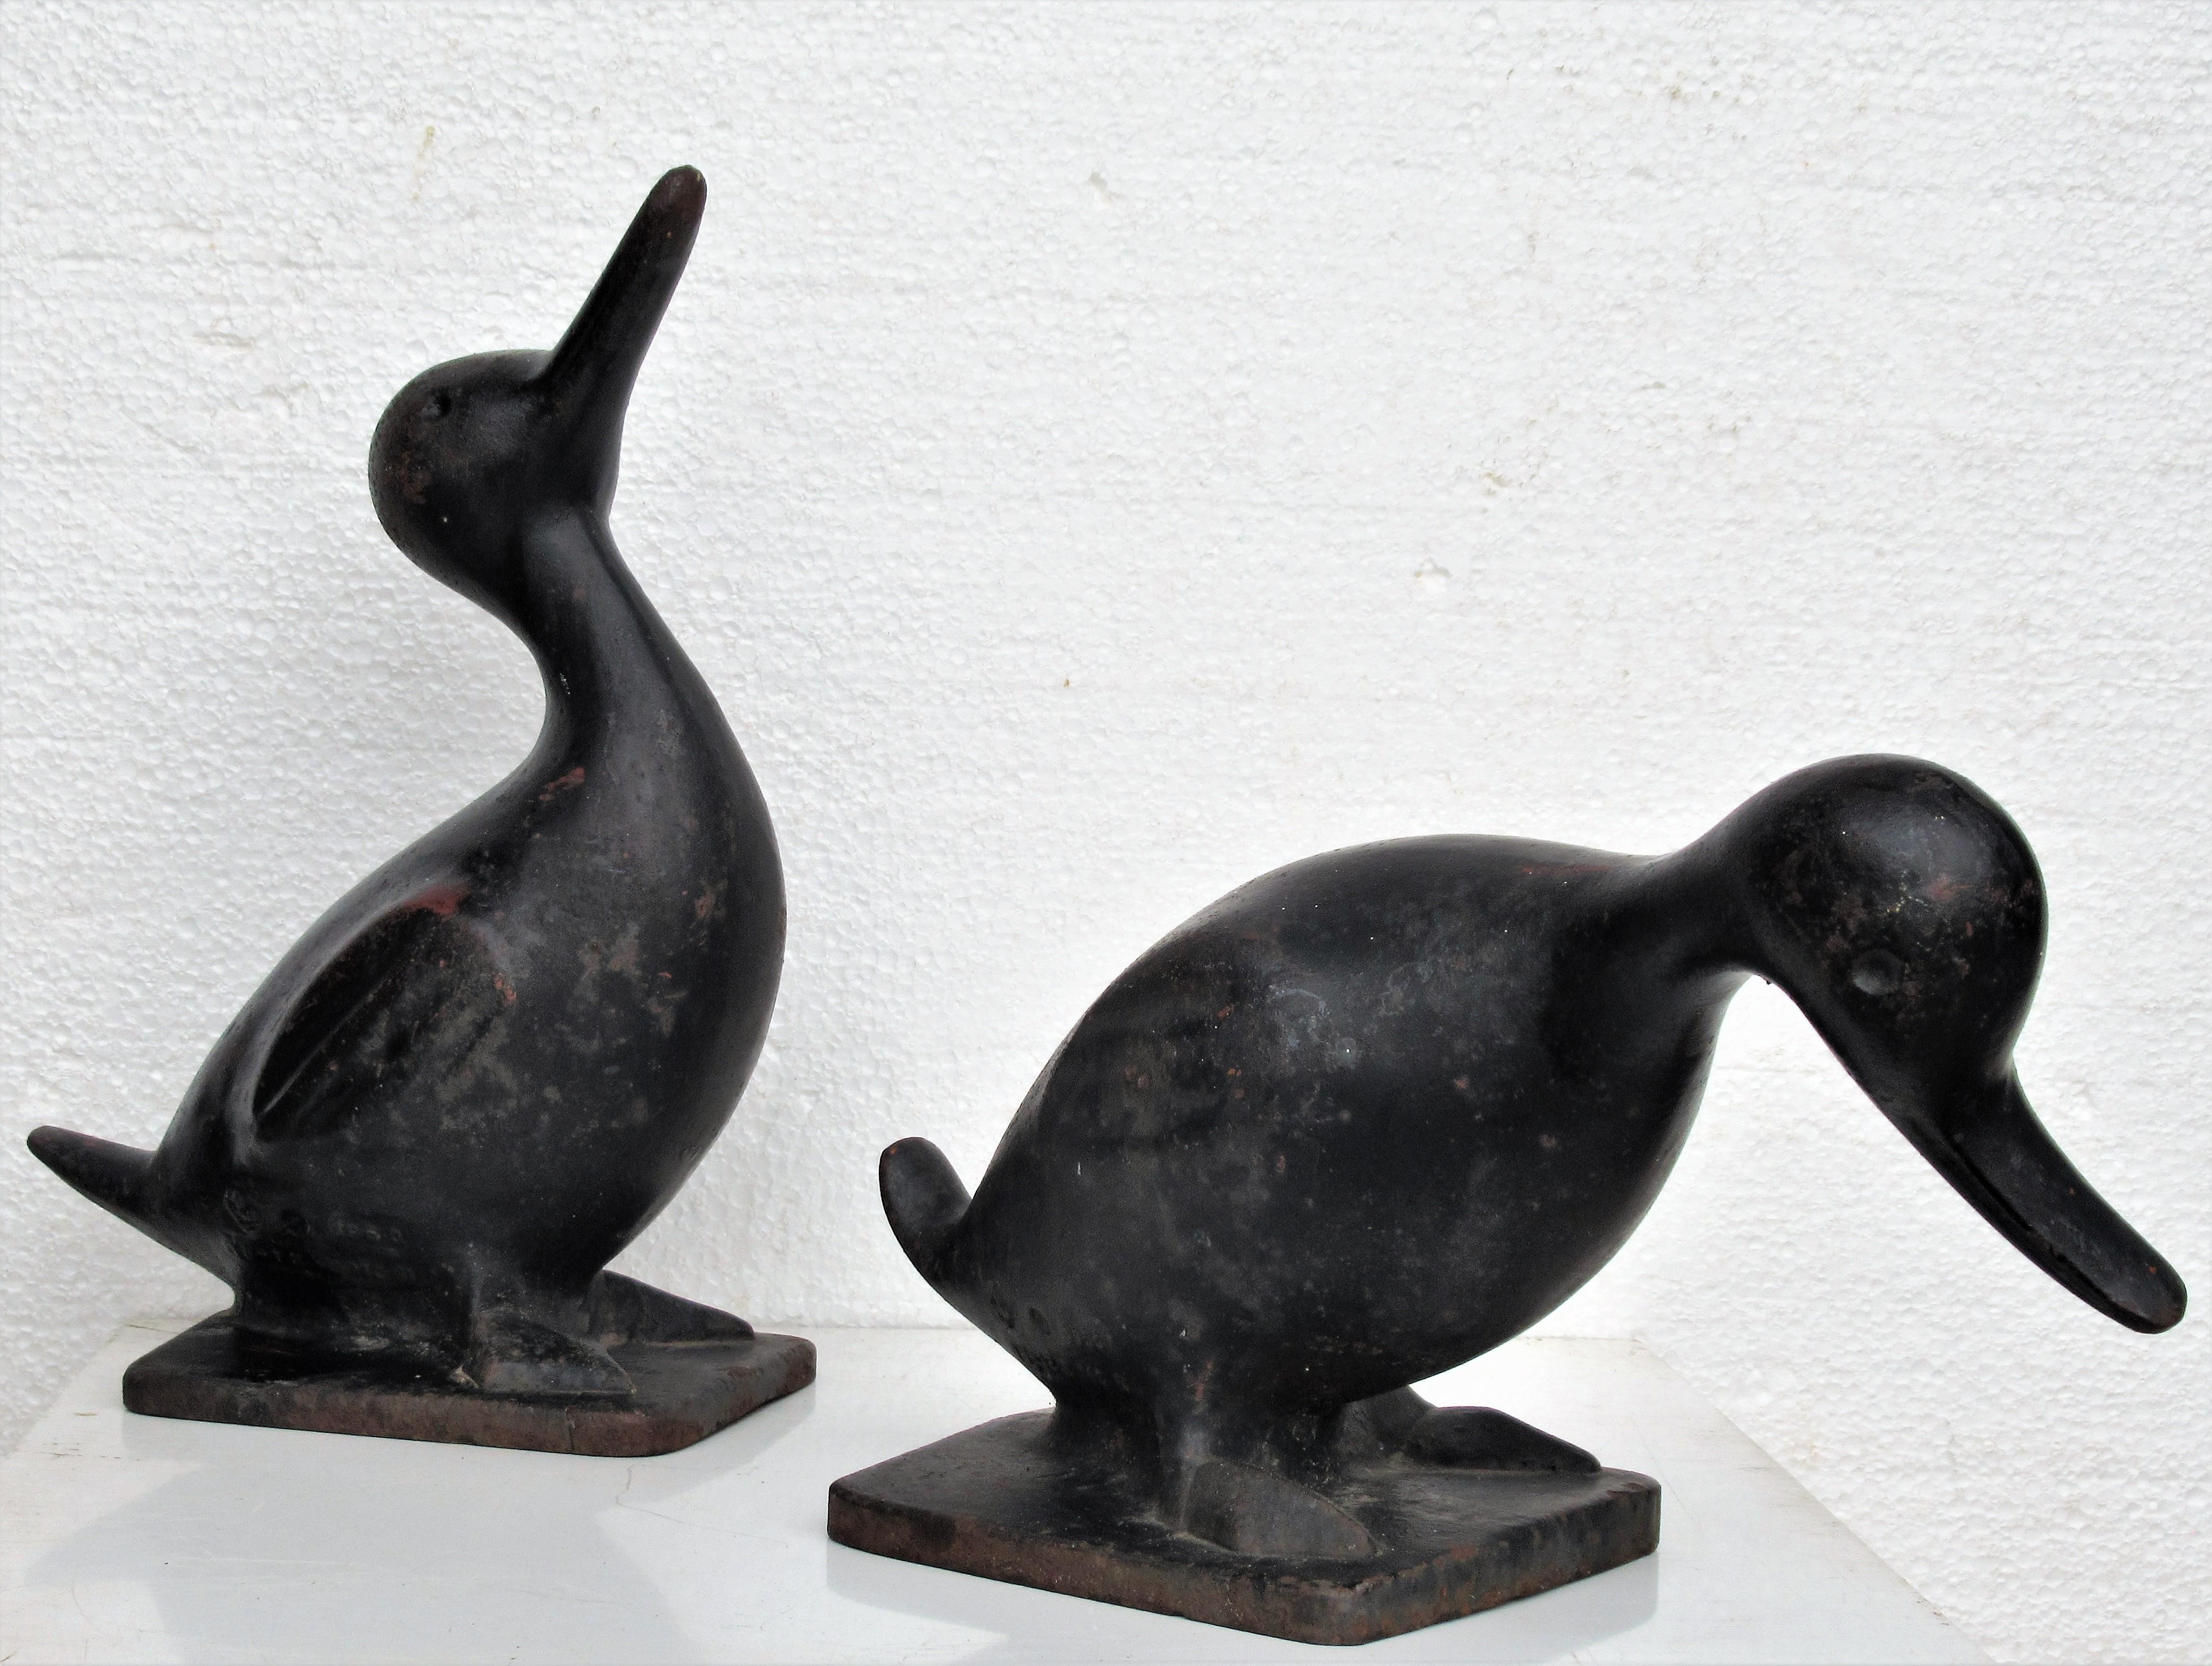 Pair of heavy cast iron ducks in nicely aged original old black painted surface. For garden statues / doorstops. Signed and dated. Very folky American modernist design. Look at all pictures and read condition report in comment section.